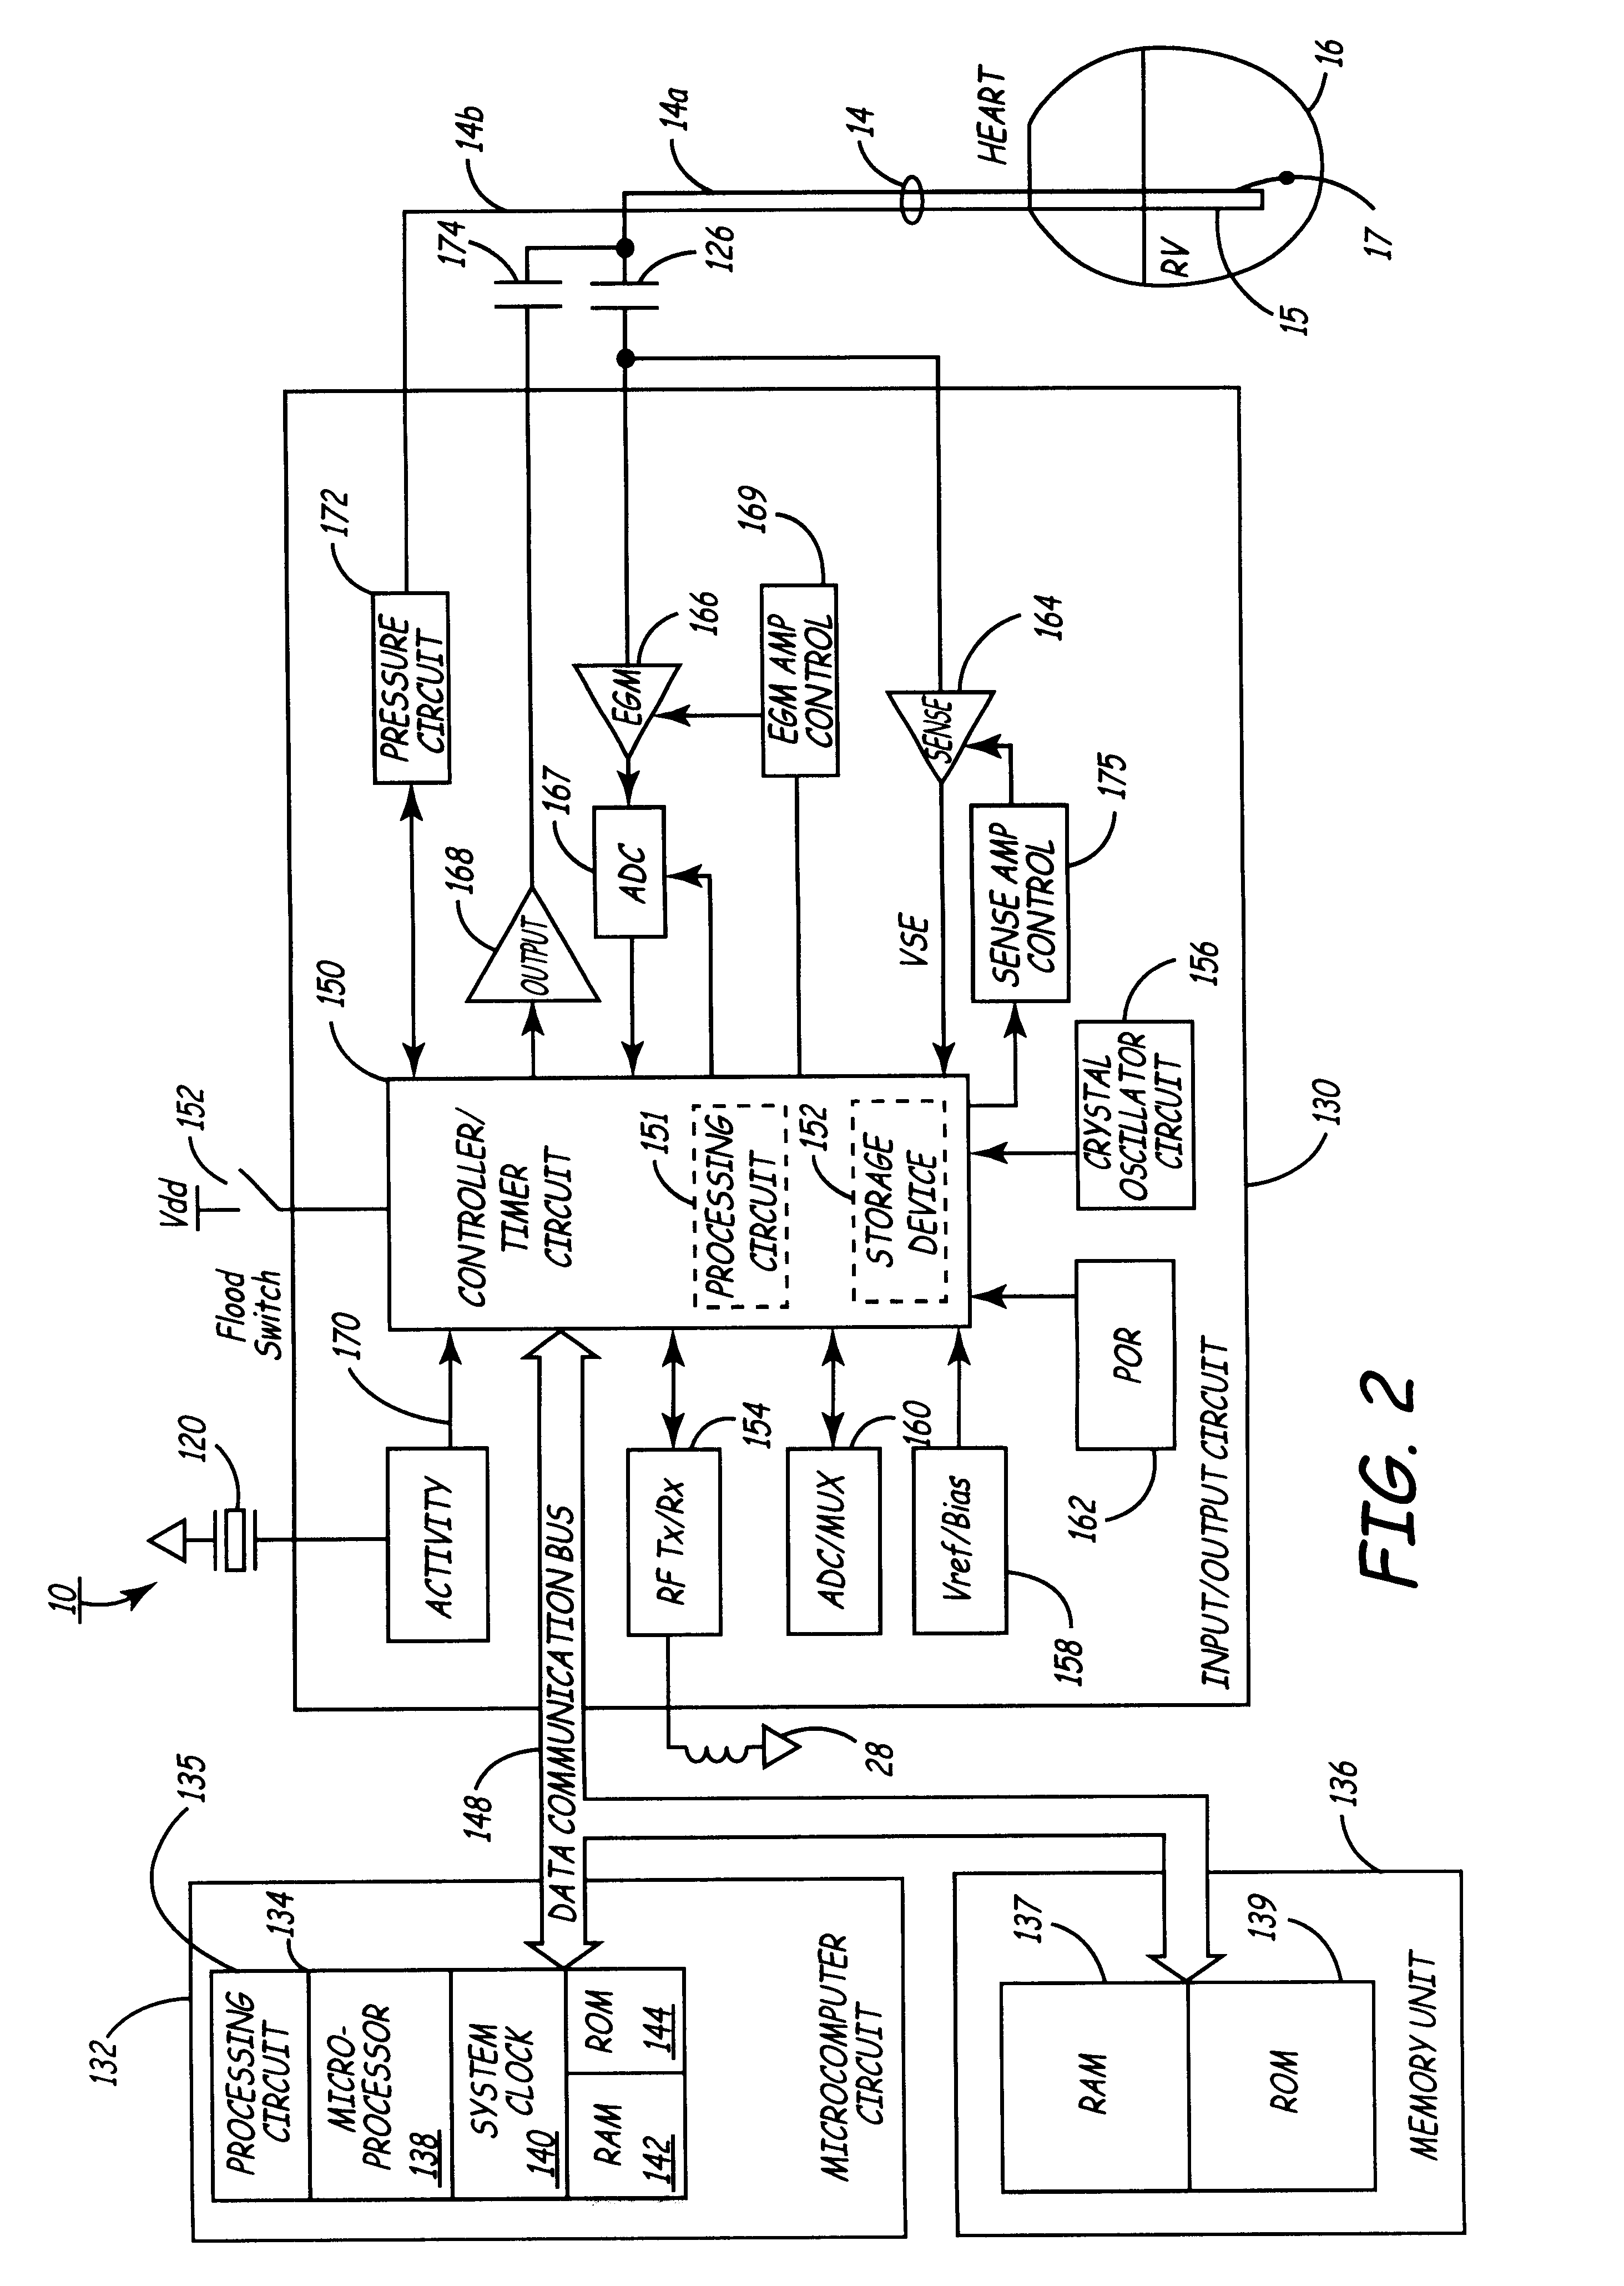 Method and apparatus for data compression of heart signals